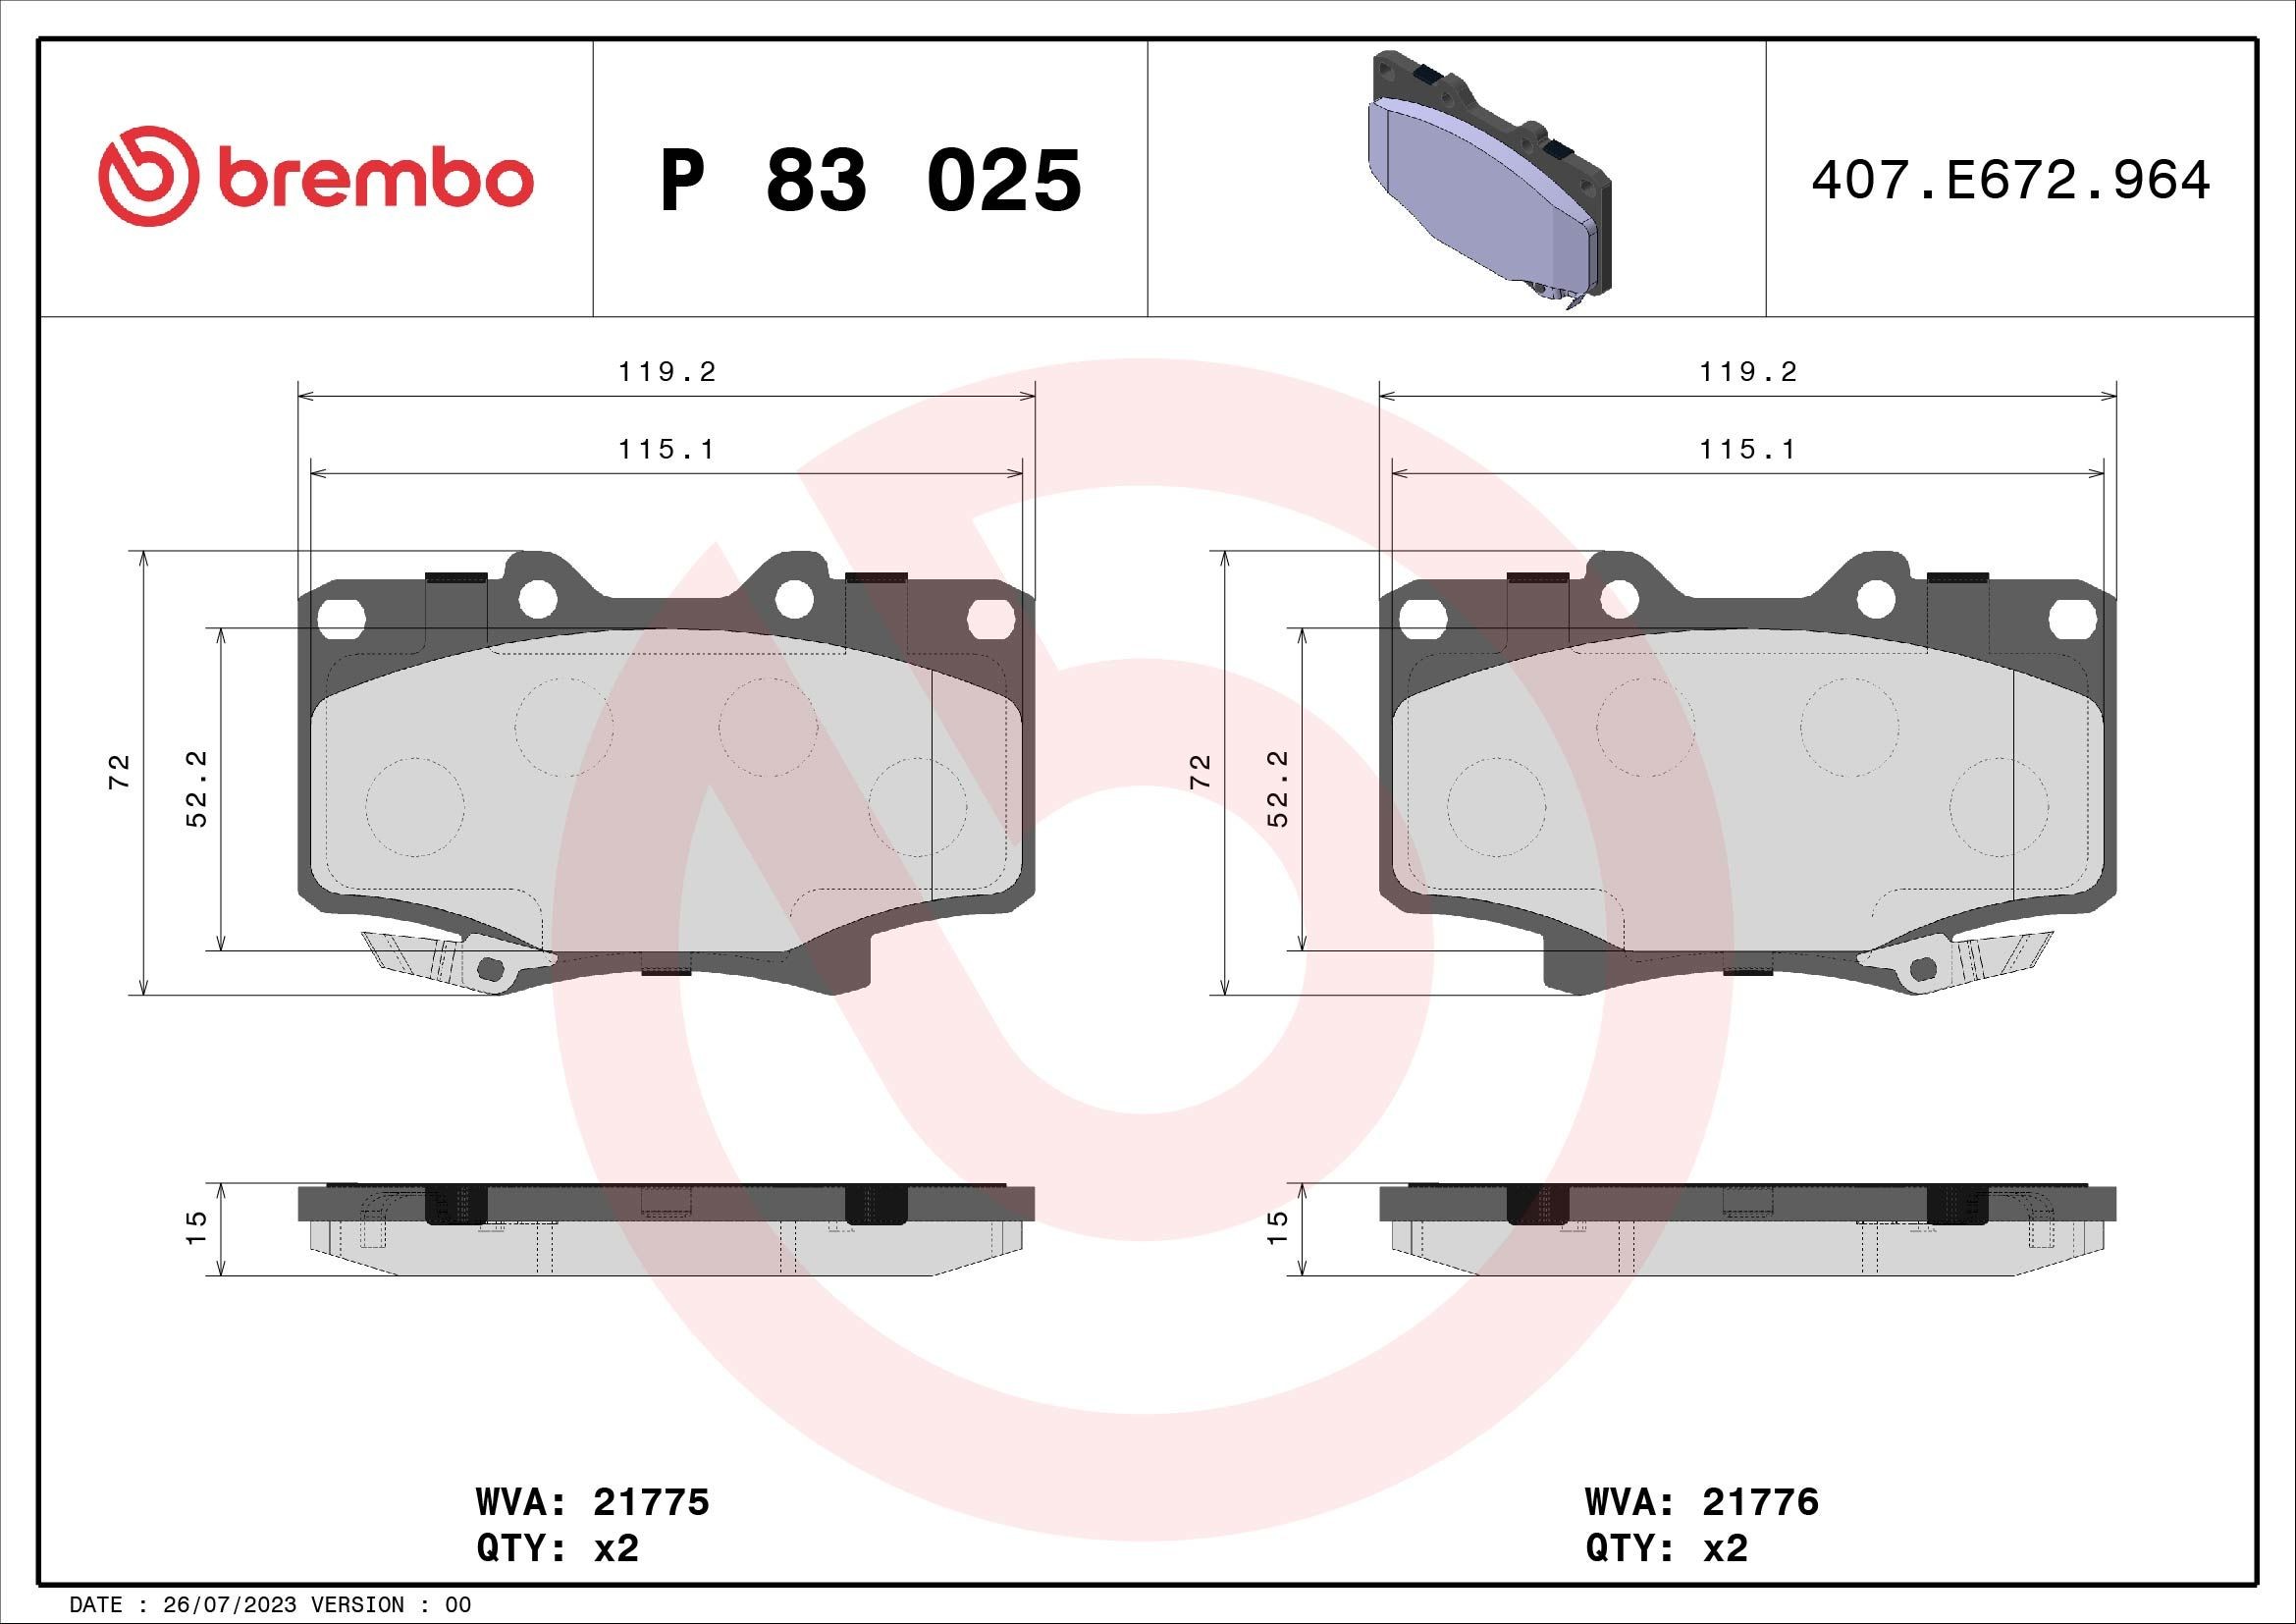 BREMBO P 83 025 Brake pad set with acoustic wear warning, without accessories